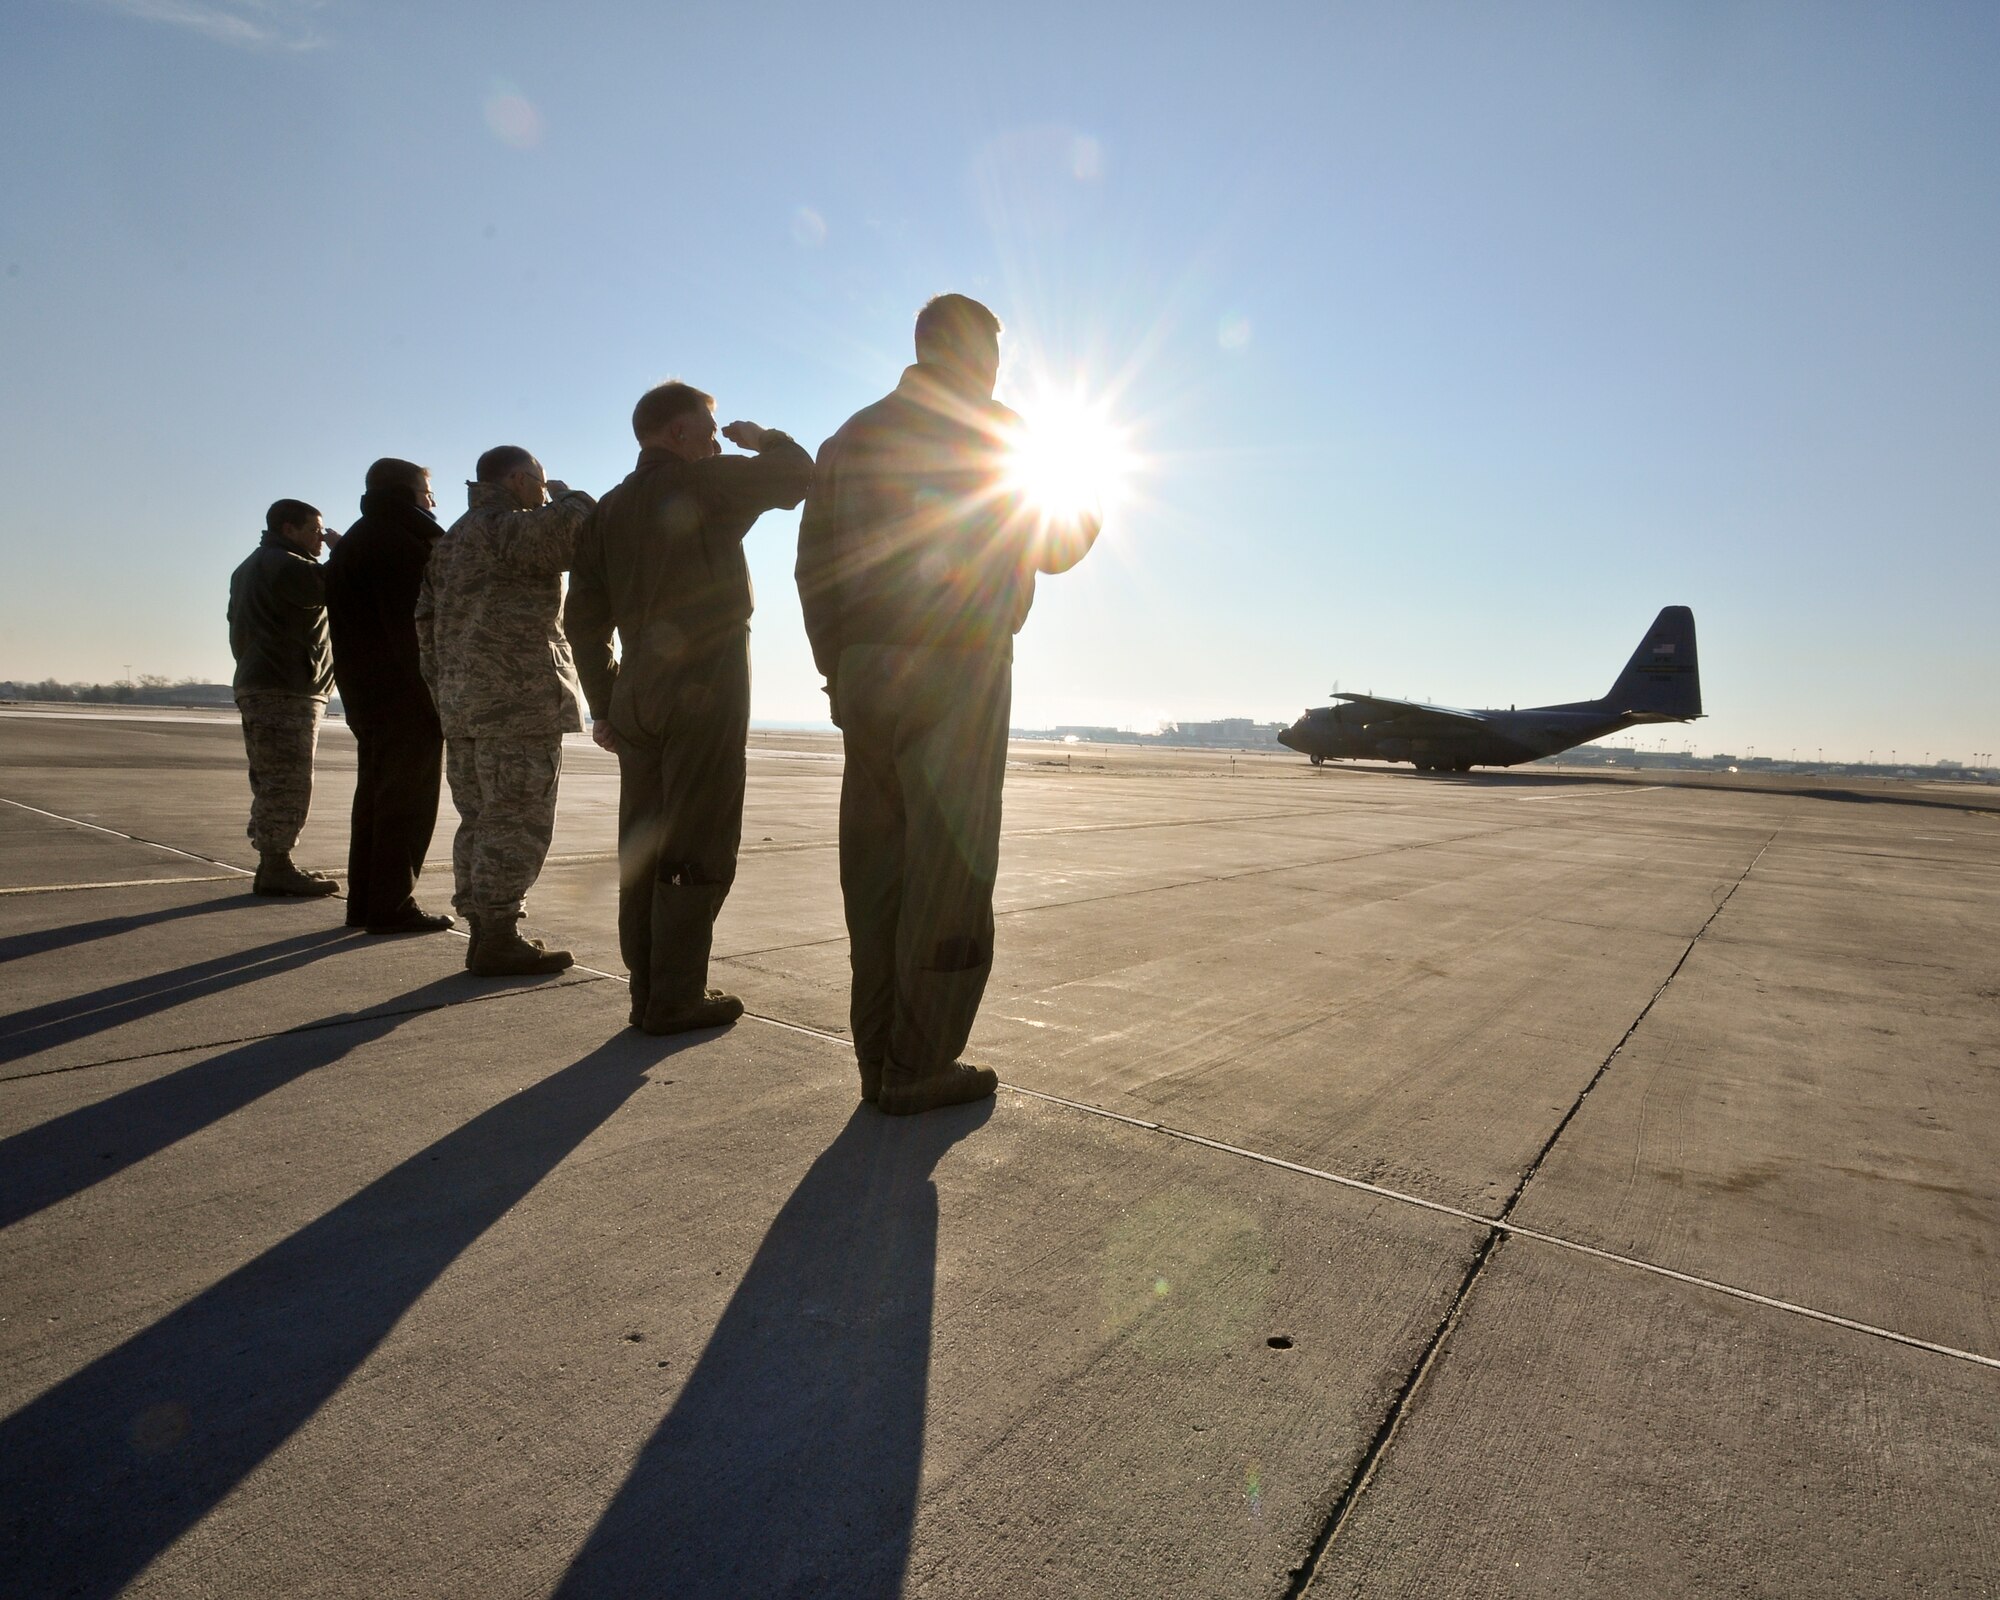 934th Airlift Wing leaders salute the deploying Airmen as their aircraft taxis for takeoff.  (Air Force Photo/Tech Sgt. Bob Sommer)